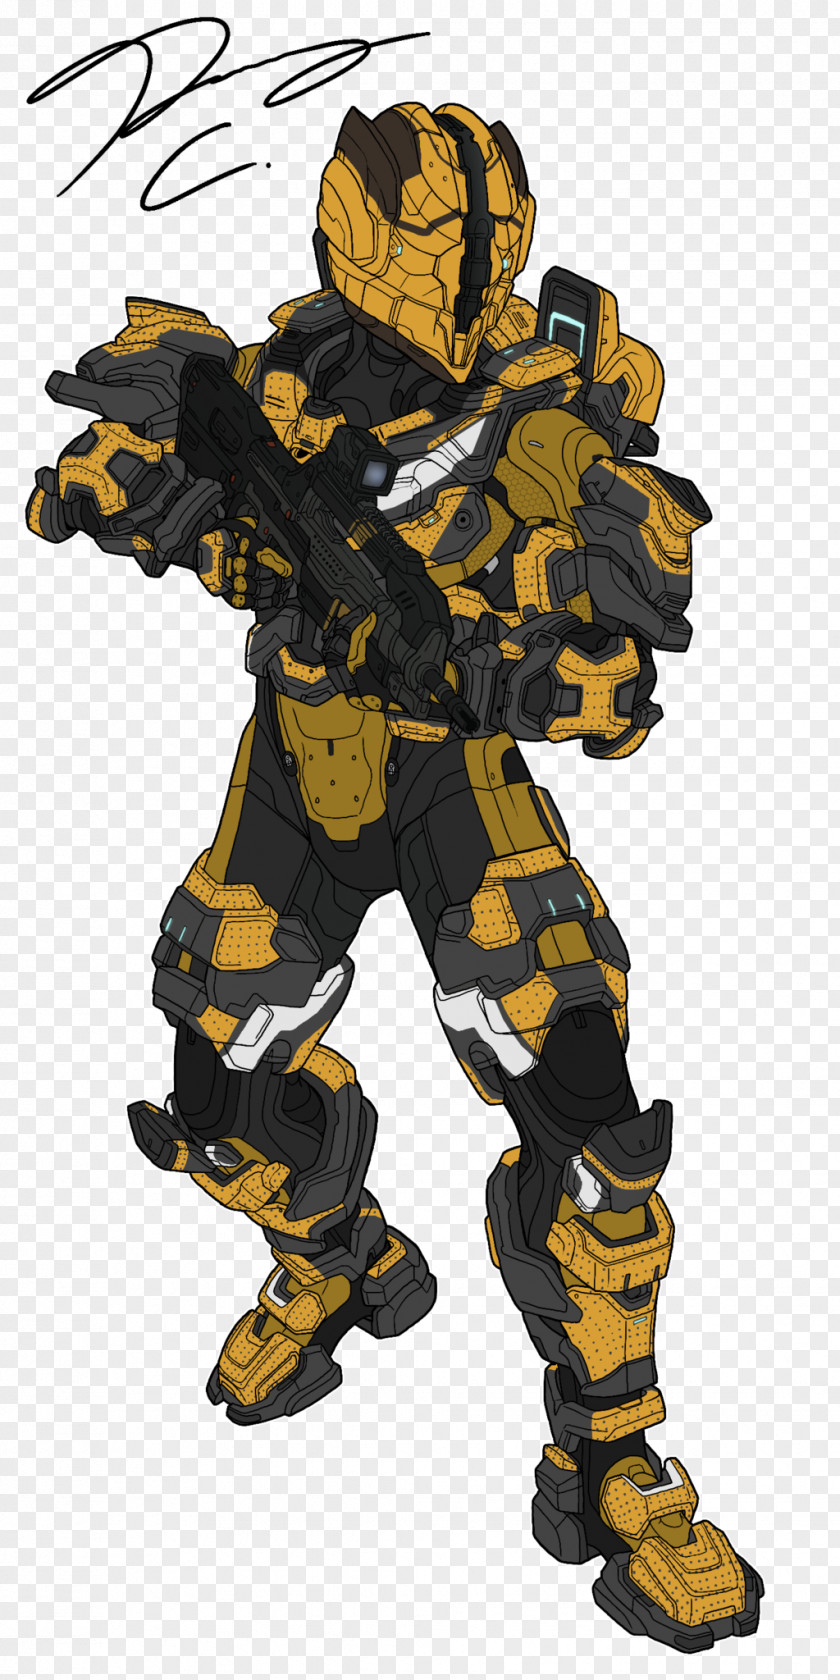 Guuver Halo 5: Guardians 2 Halo: Reach Spartan PNG